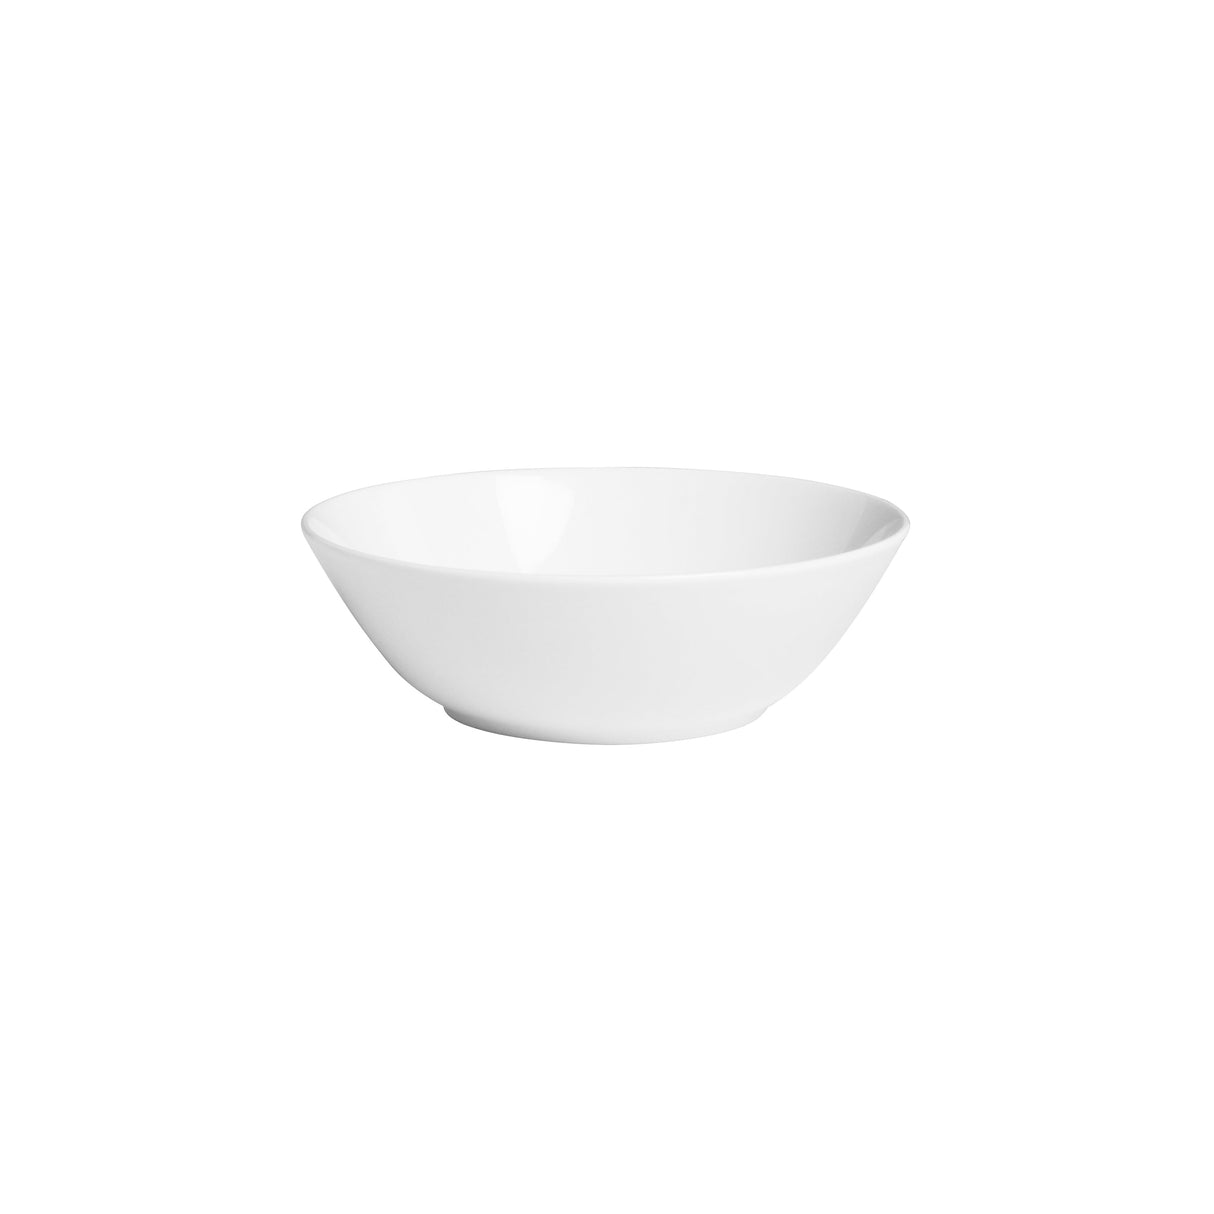 Cereal Bowl - 150Mm, Pacific Bone China from Australia Fine China. made out of Porcelain and sold in boxes of 60. Hospitality quality at wholesale price with The Flying Fork! 